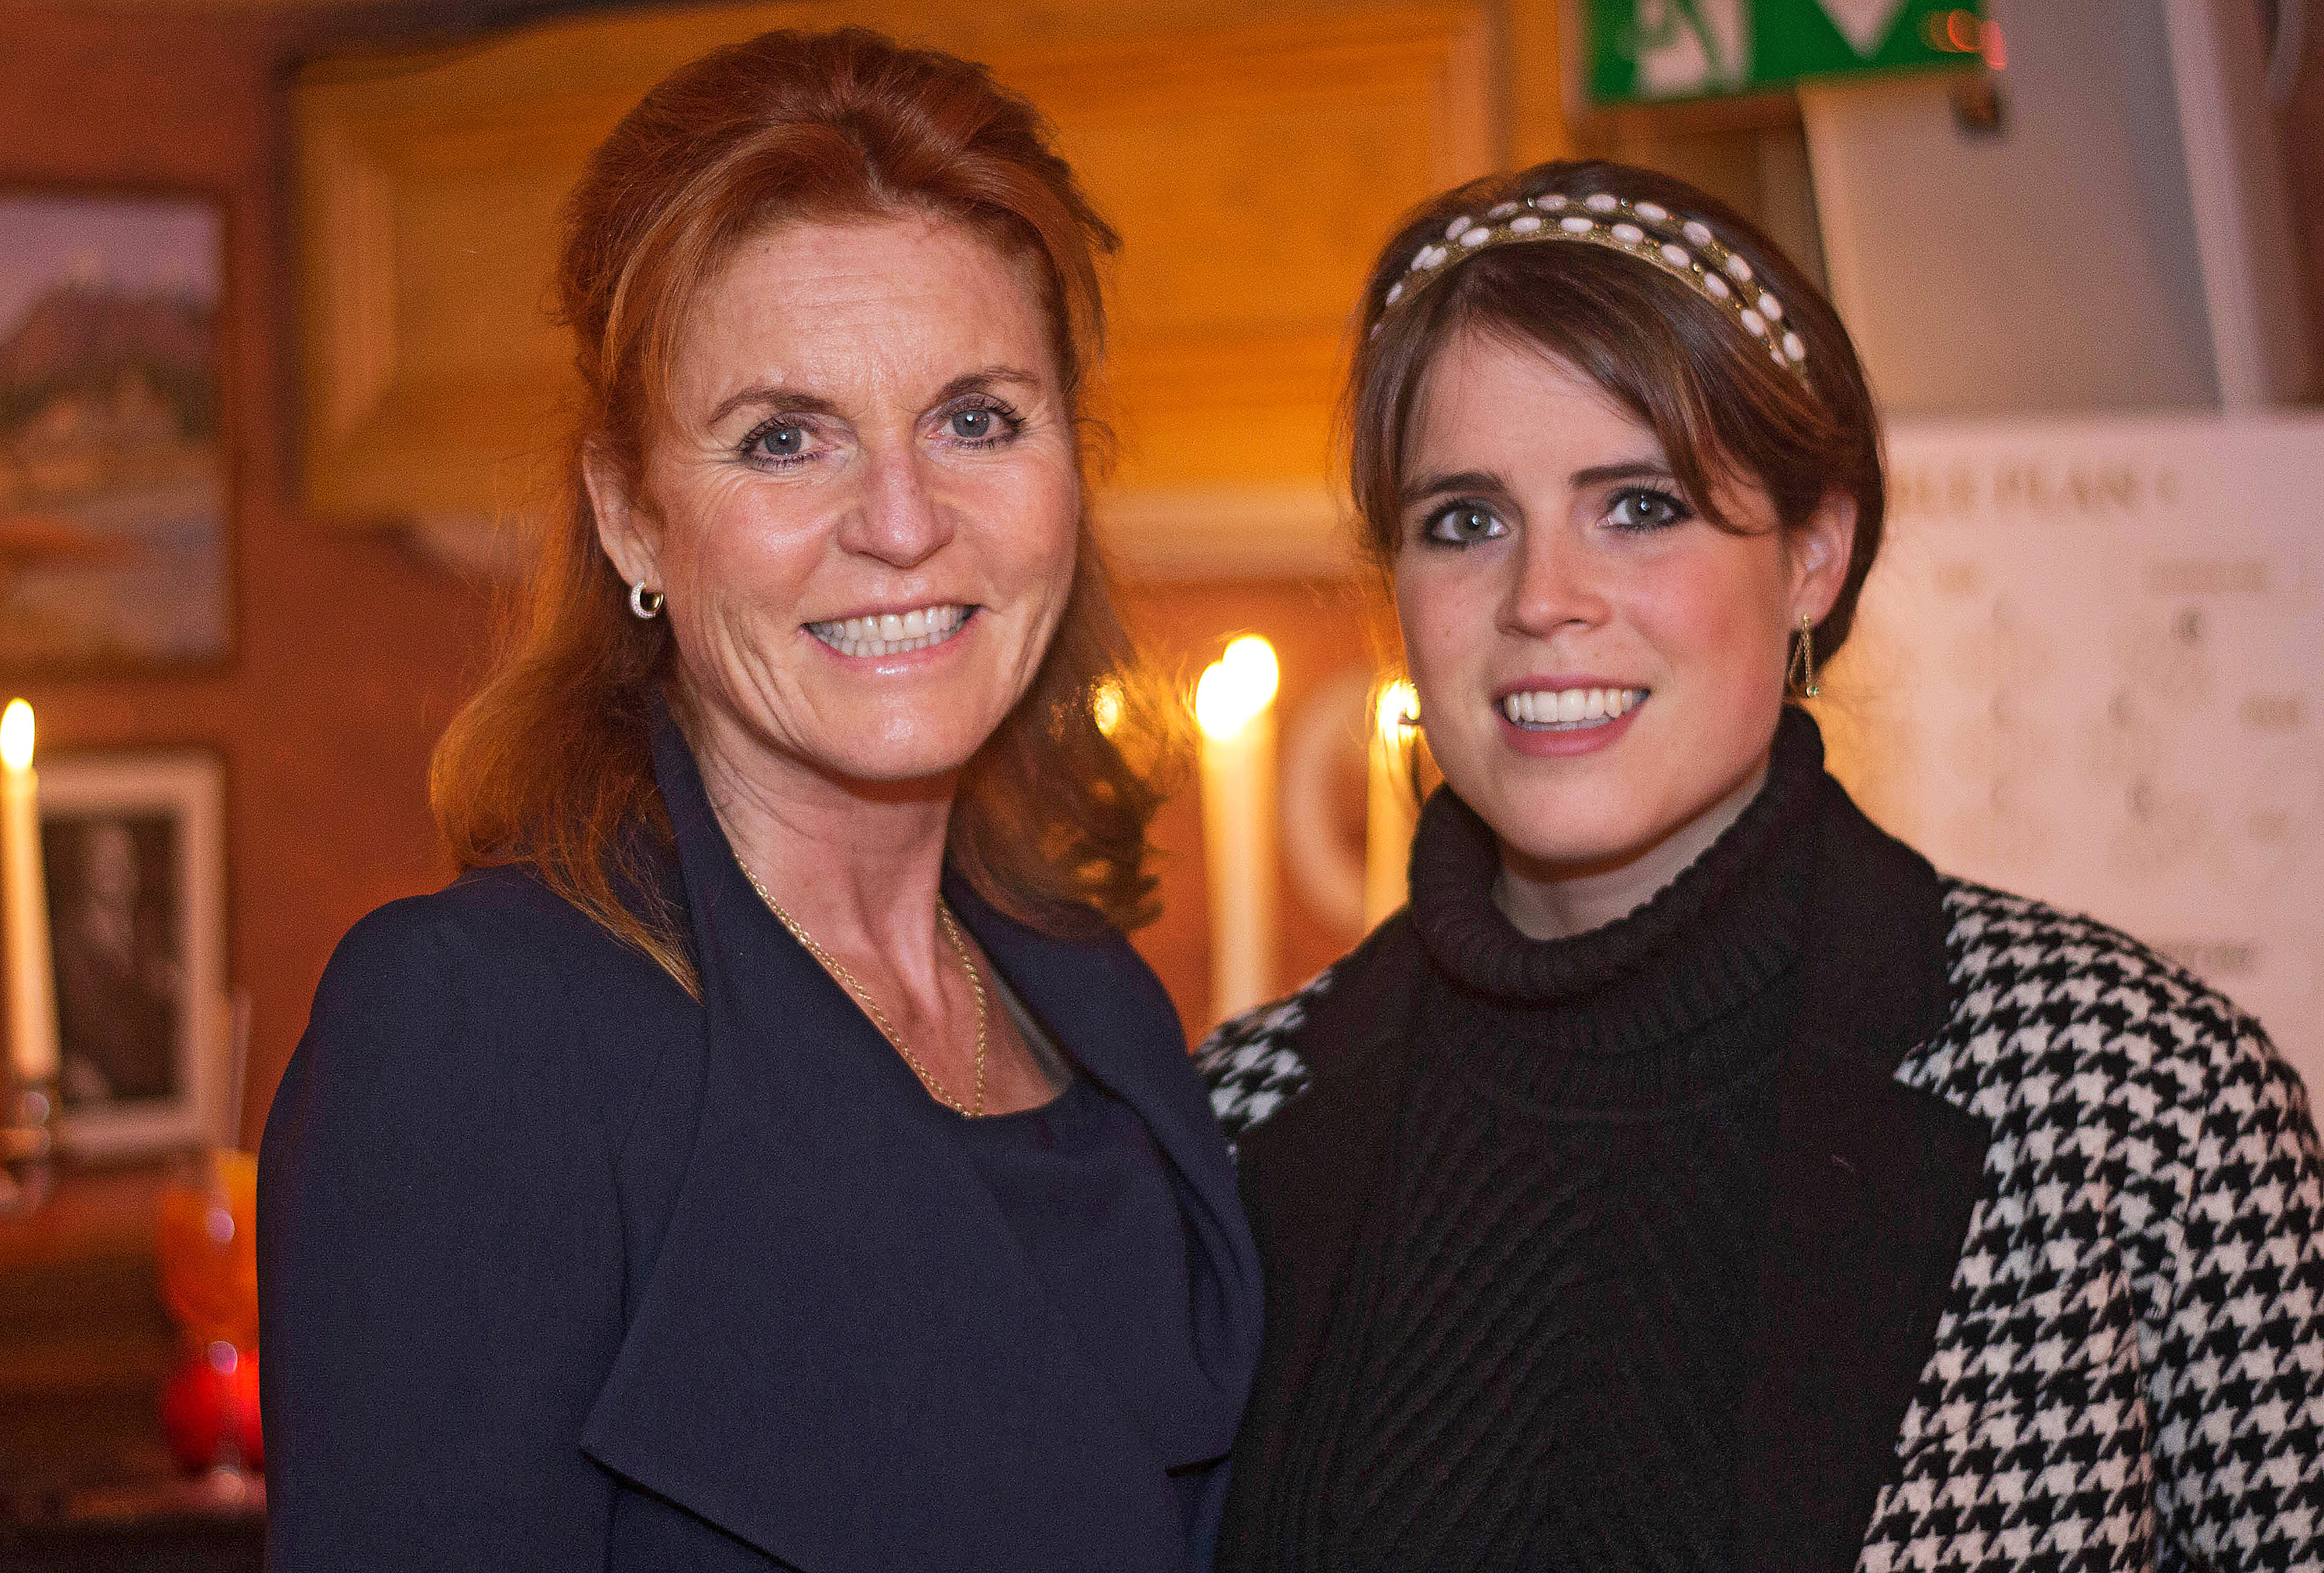 Sarah Ferguson, Duchess of York, and Princess Eugenie at The Miles Frost Fund party on June 27, 2017, in London, England | Source: Getty Images